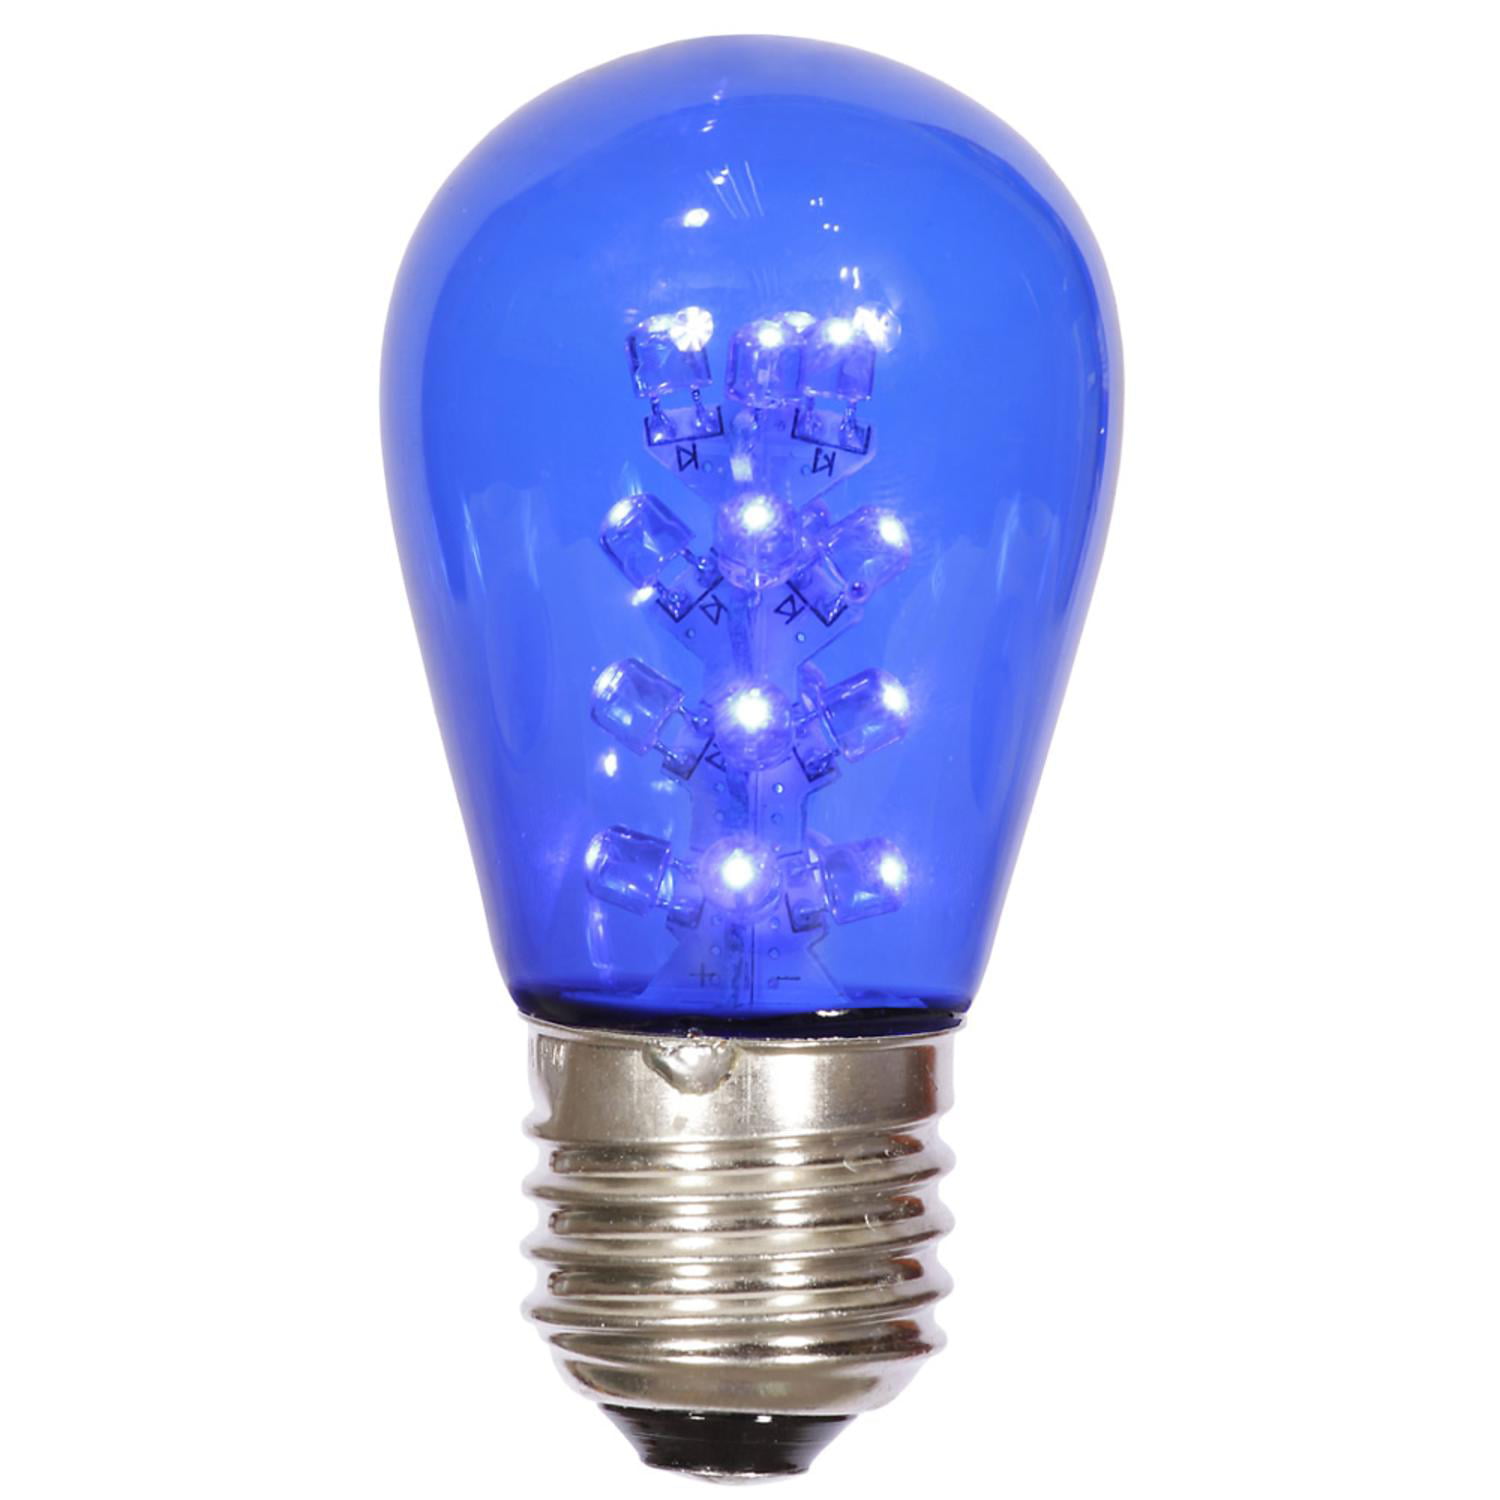 Pack of 6 LED Blue S14 Transparent Replacement Christmas Light Bulbs E26 Medium Nickle Base